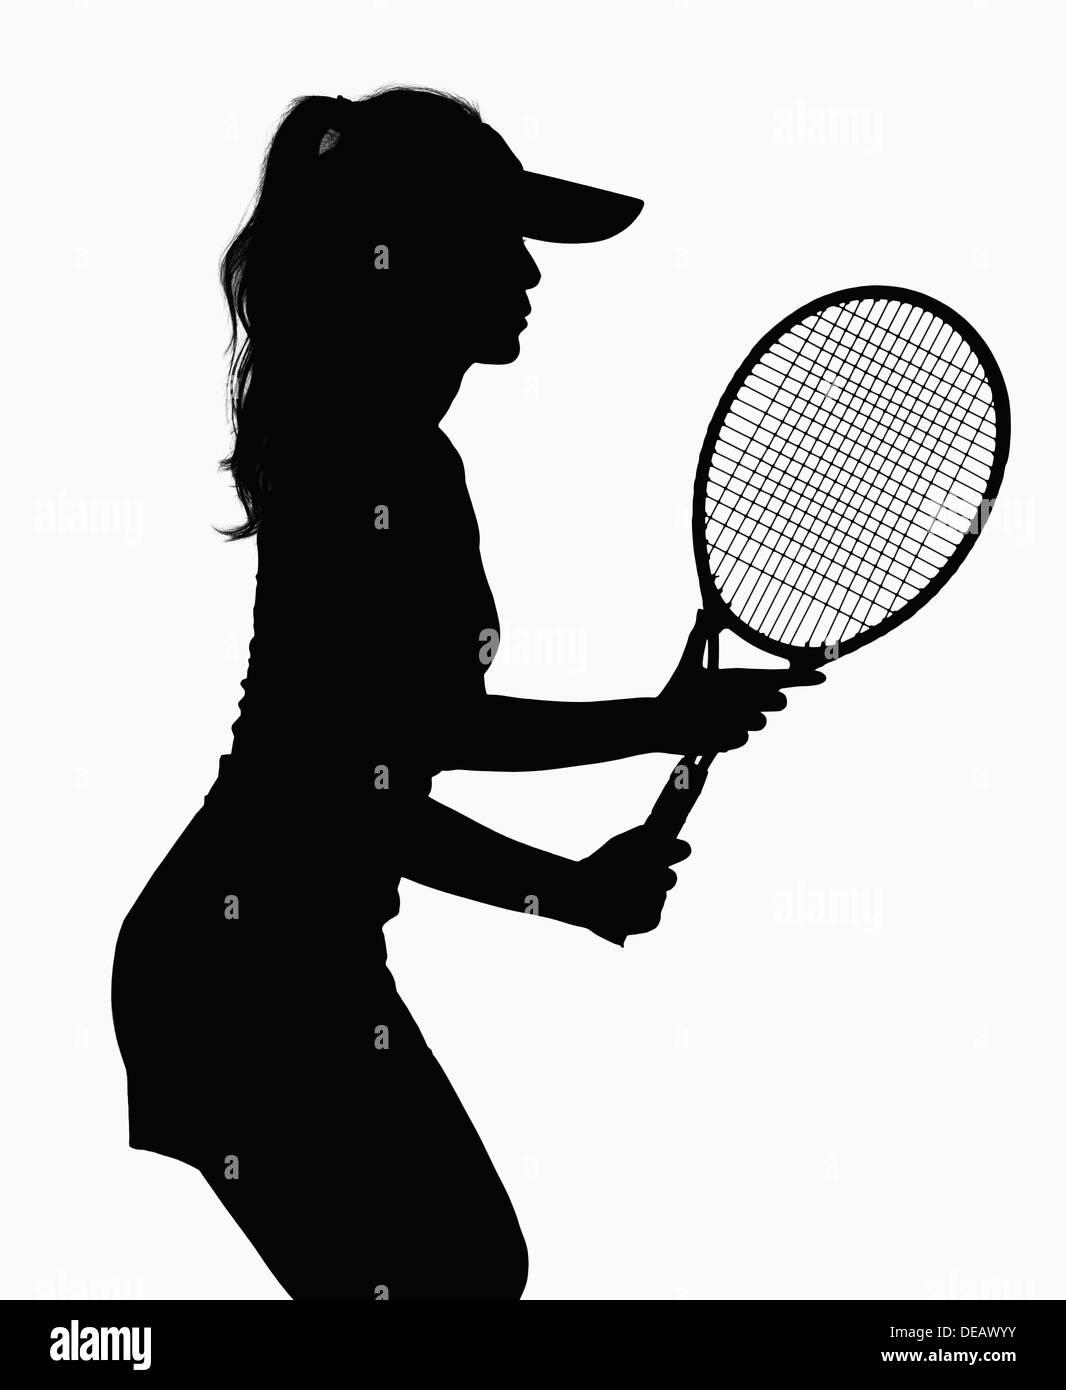 Silhouette of woman with tennis racket. Stock Photo